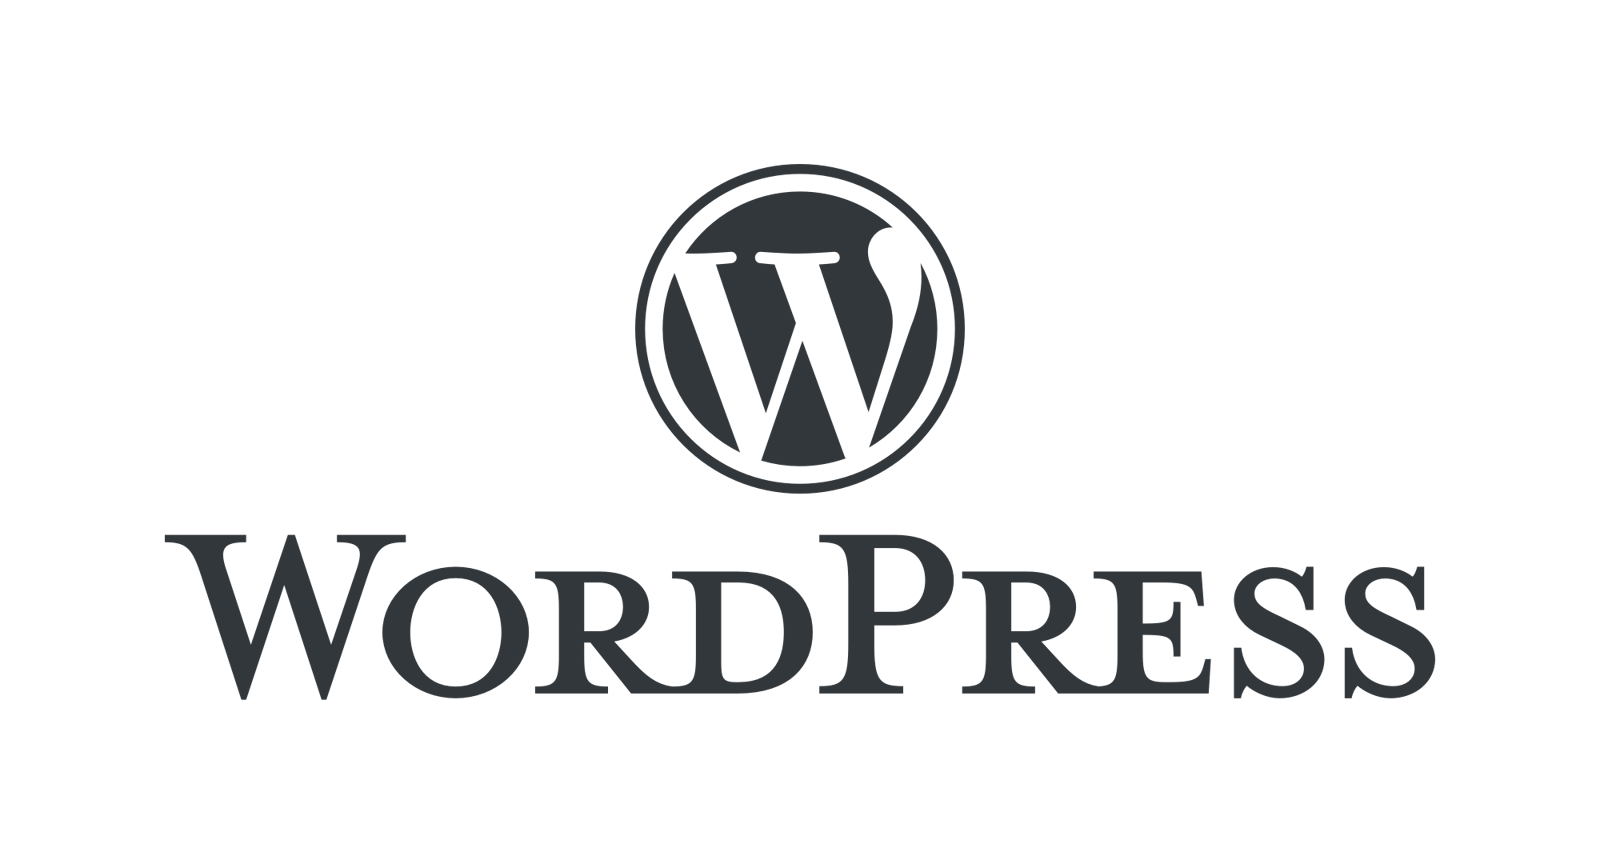 Cookie consent for WordPress